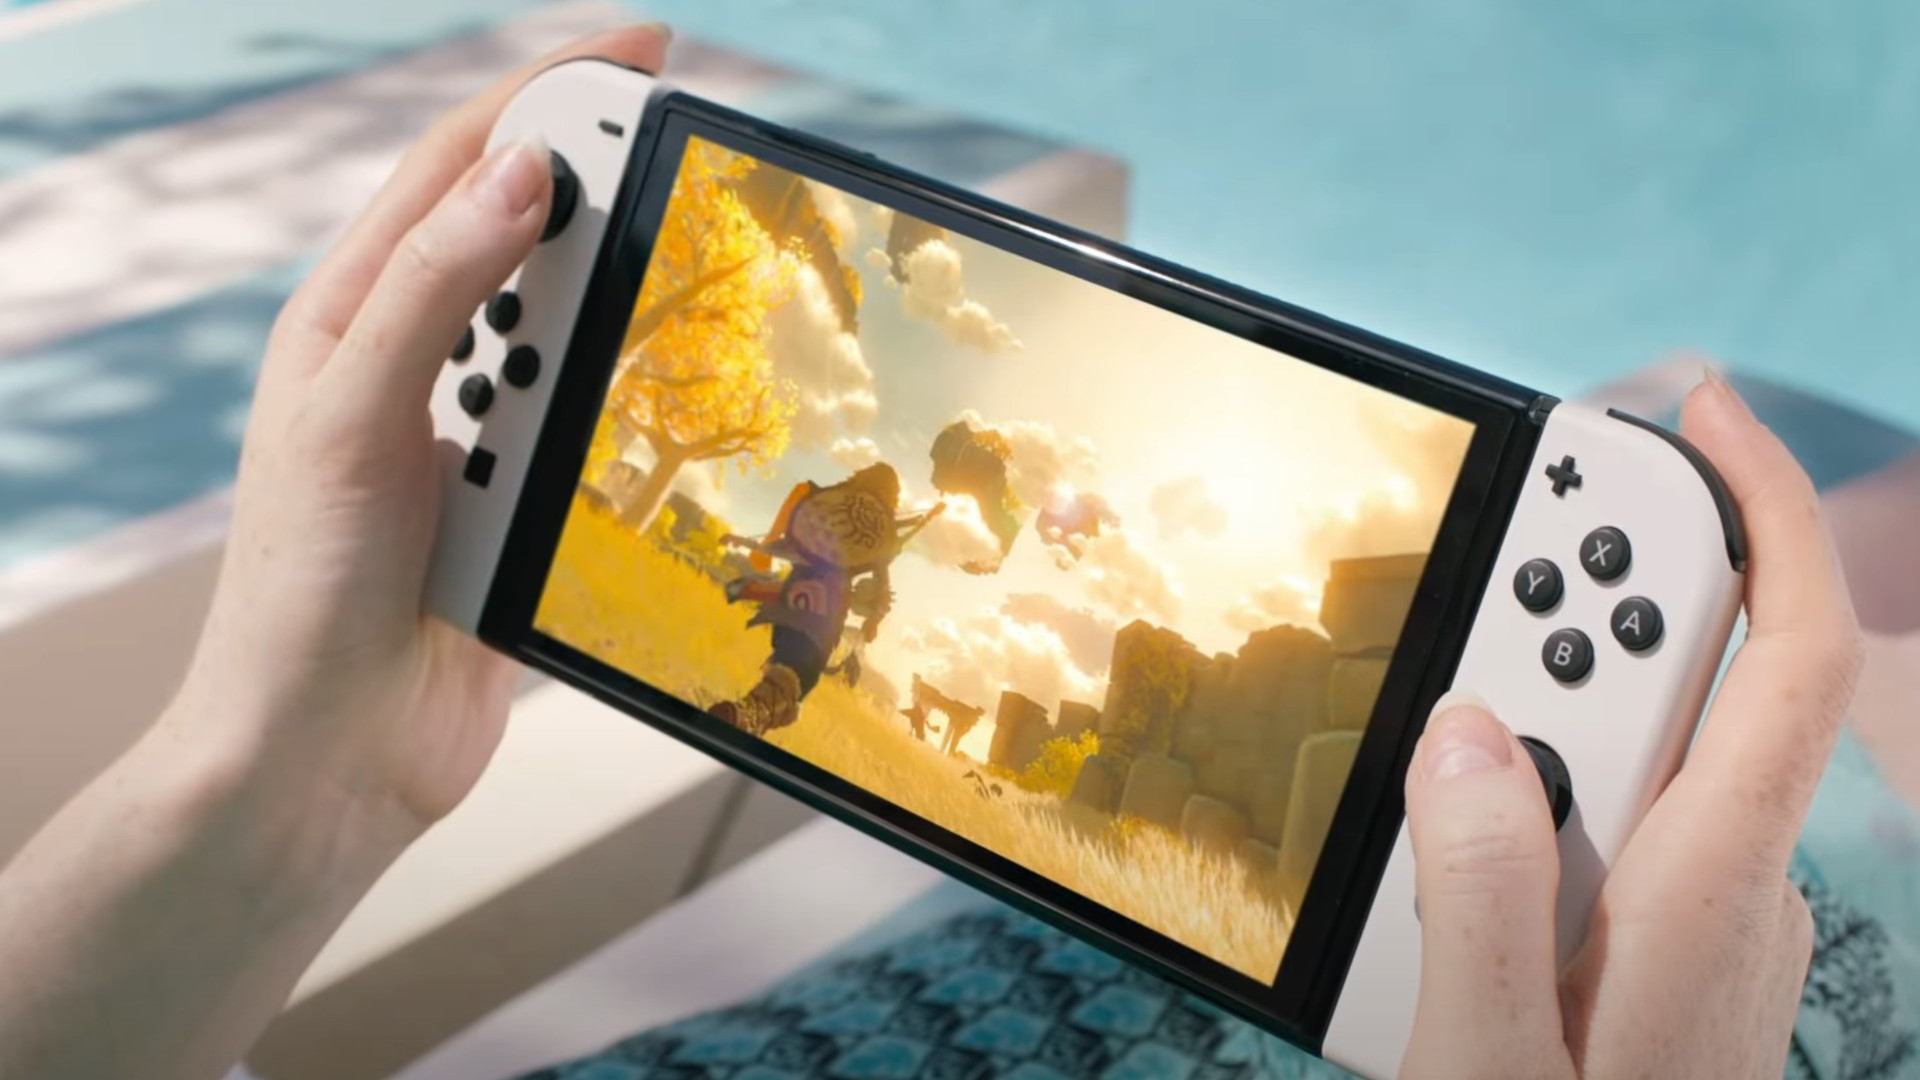 White Nintendo Switch OLED being played in handheld mode